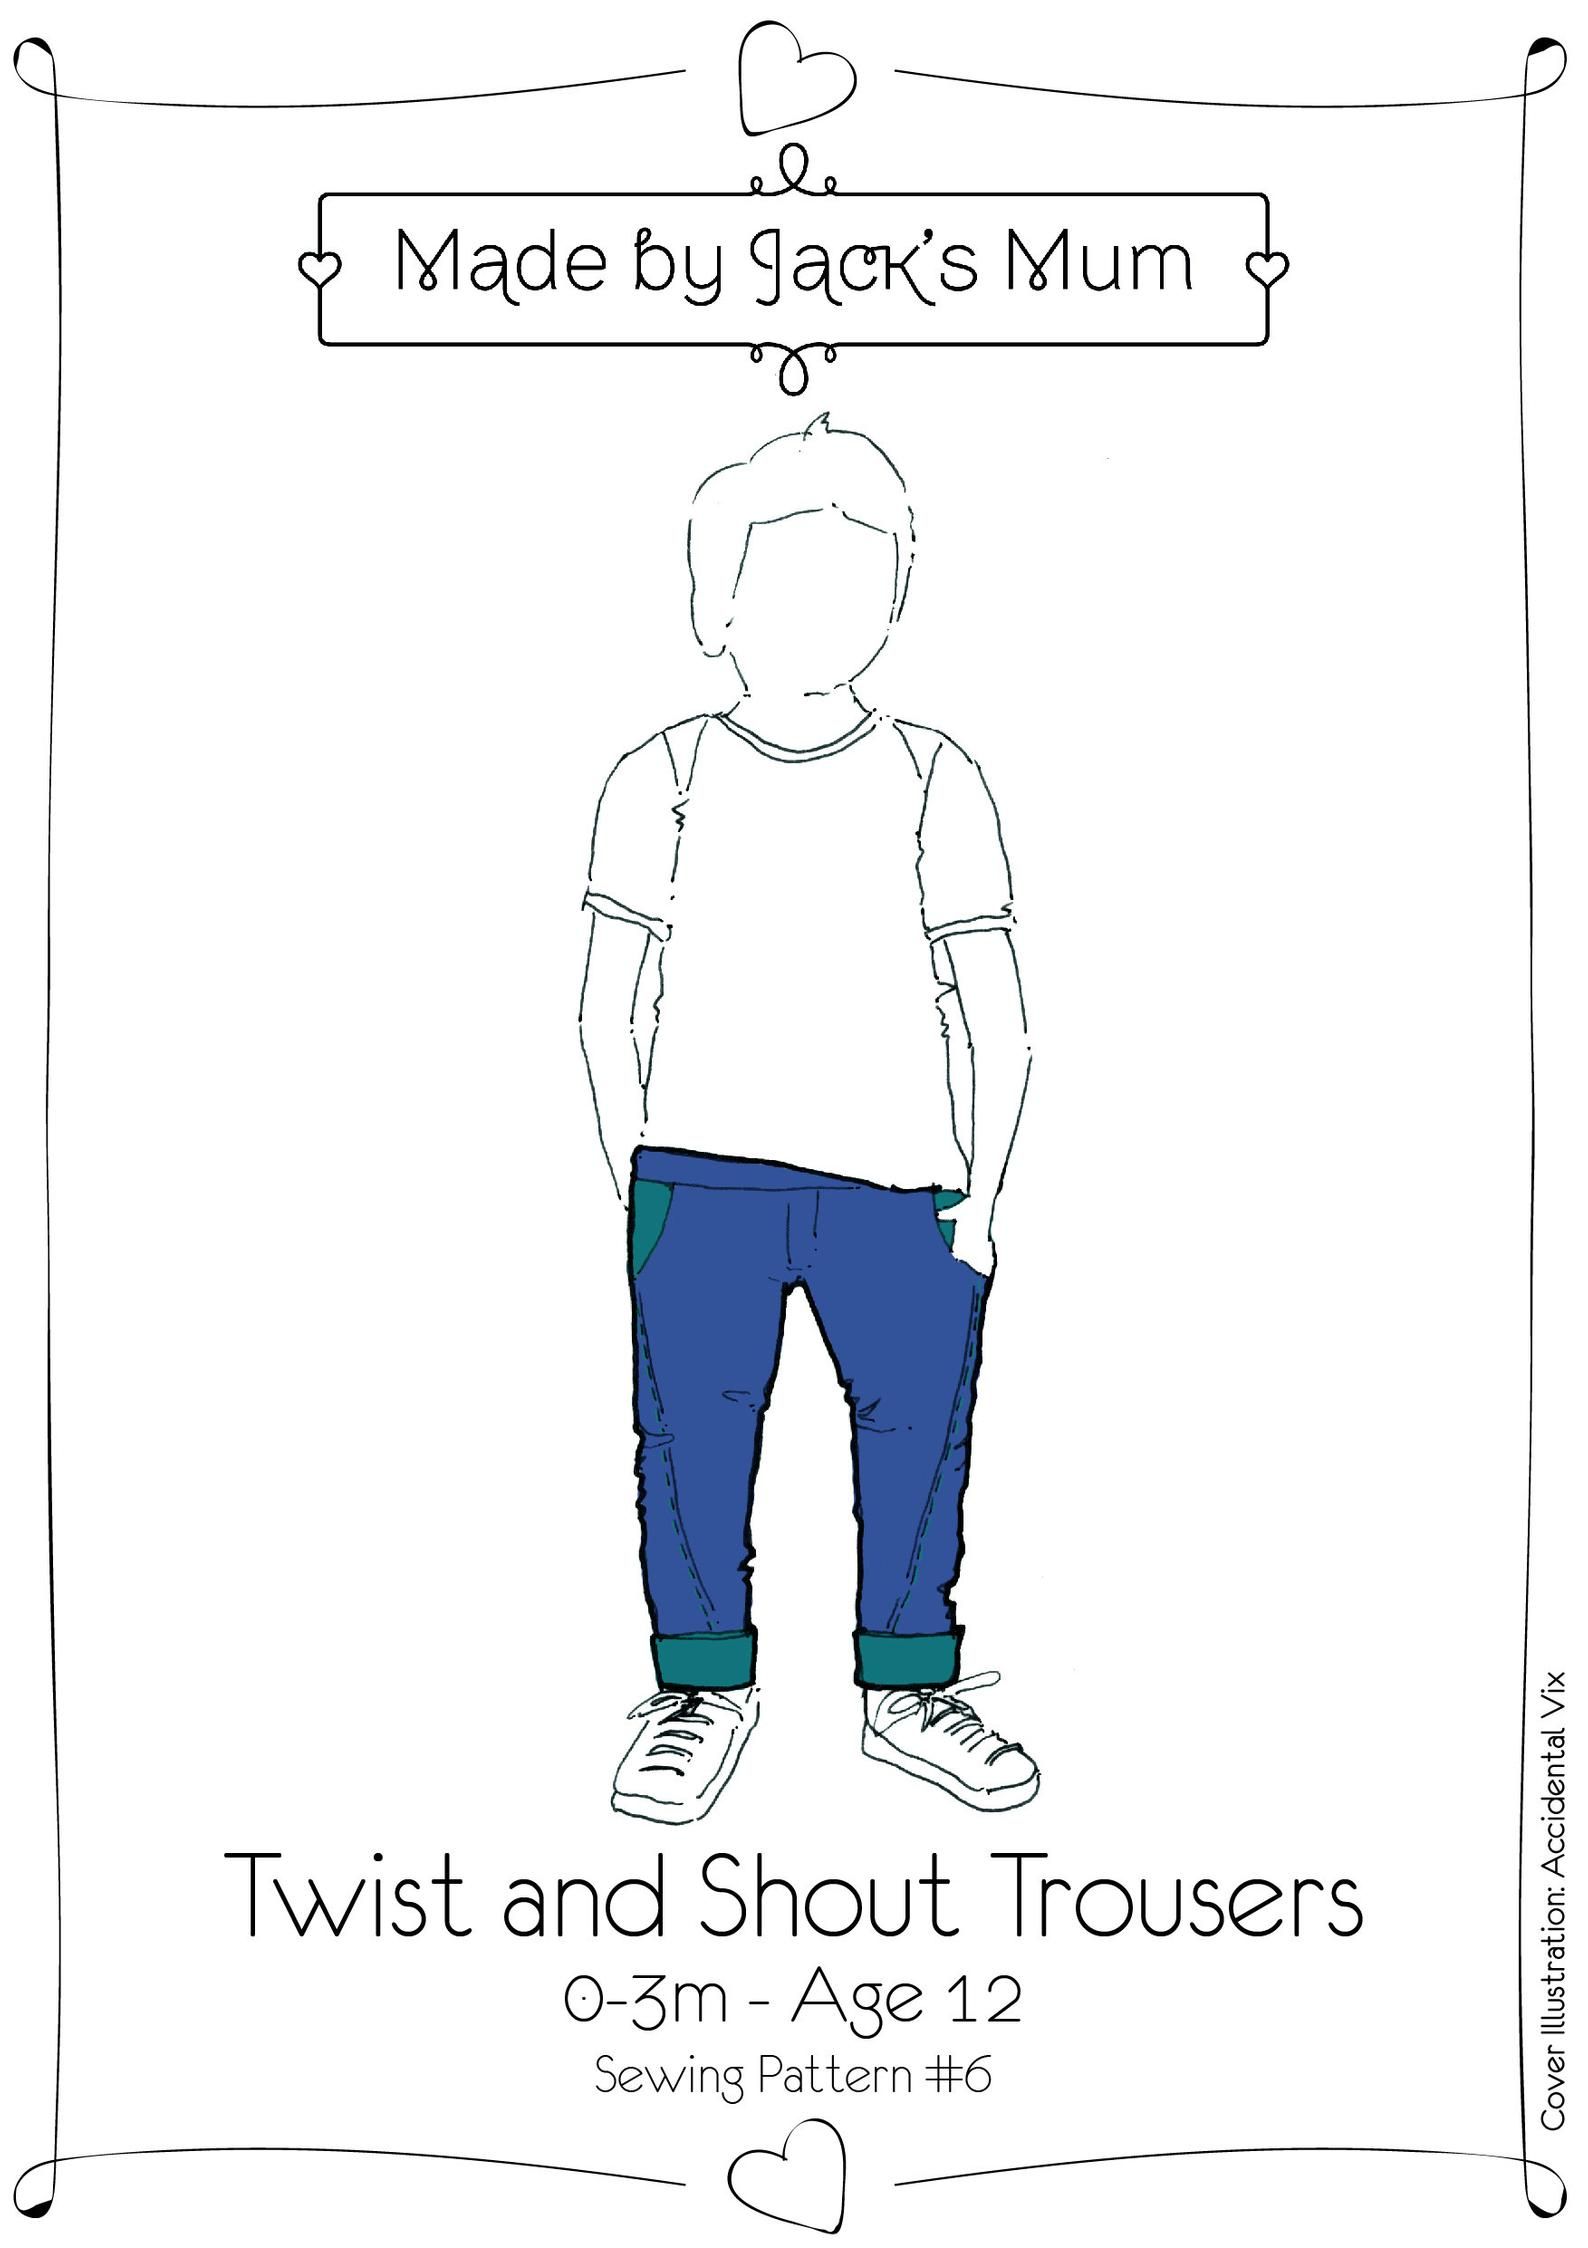 MBJM Twist and Shout Trousers Sewing Pattern